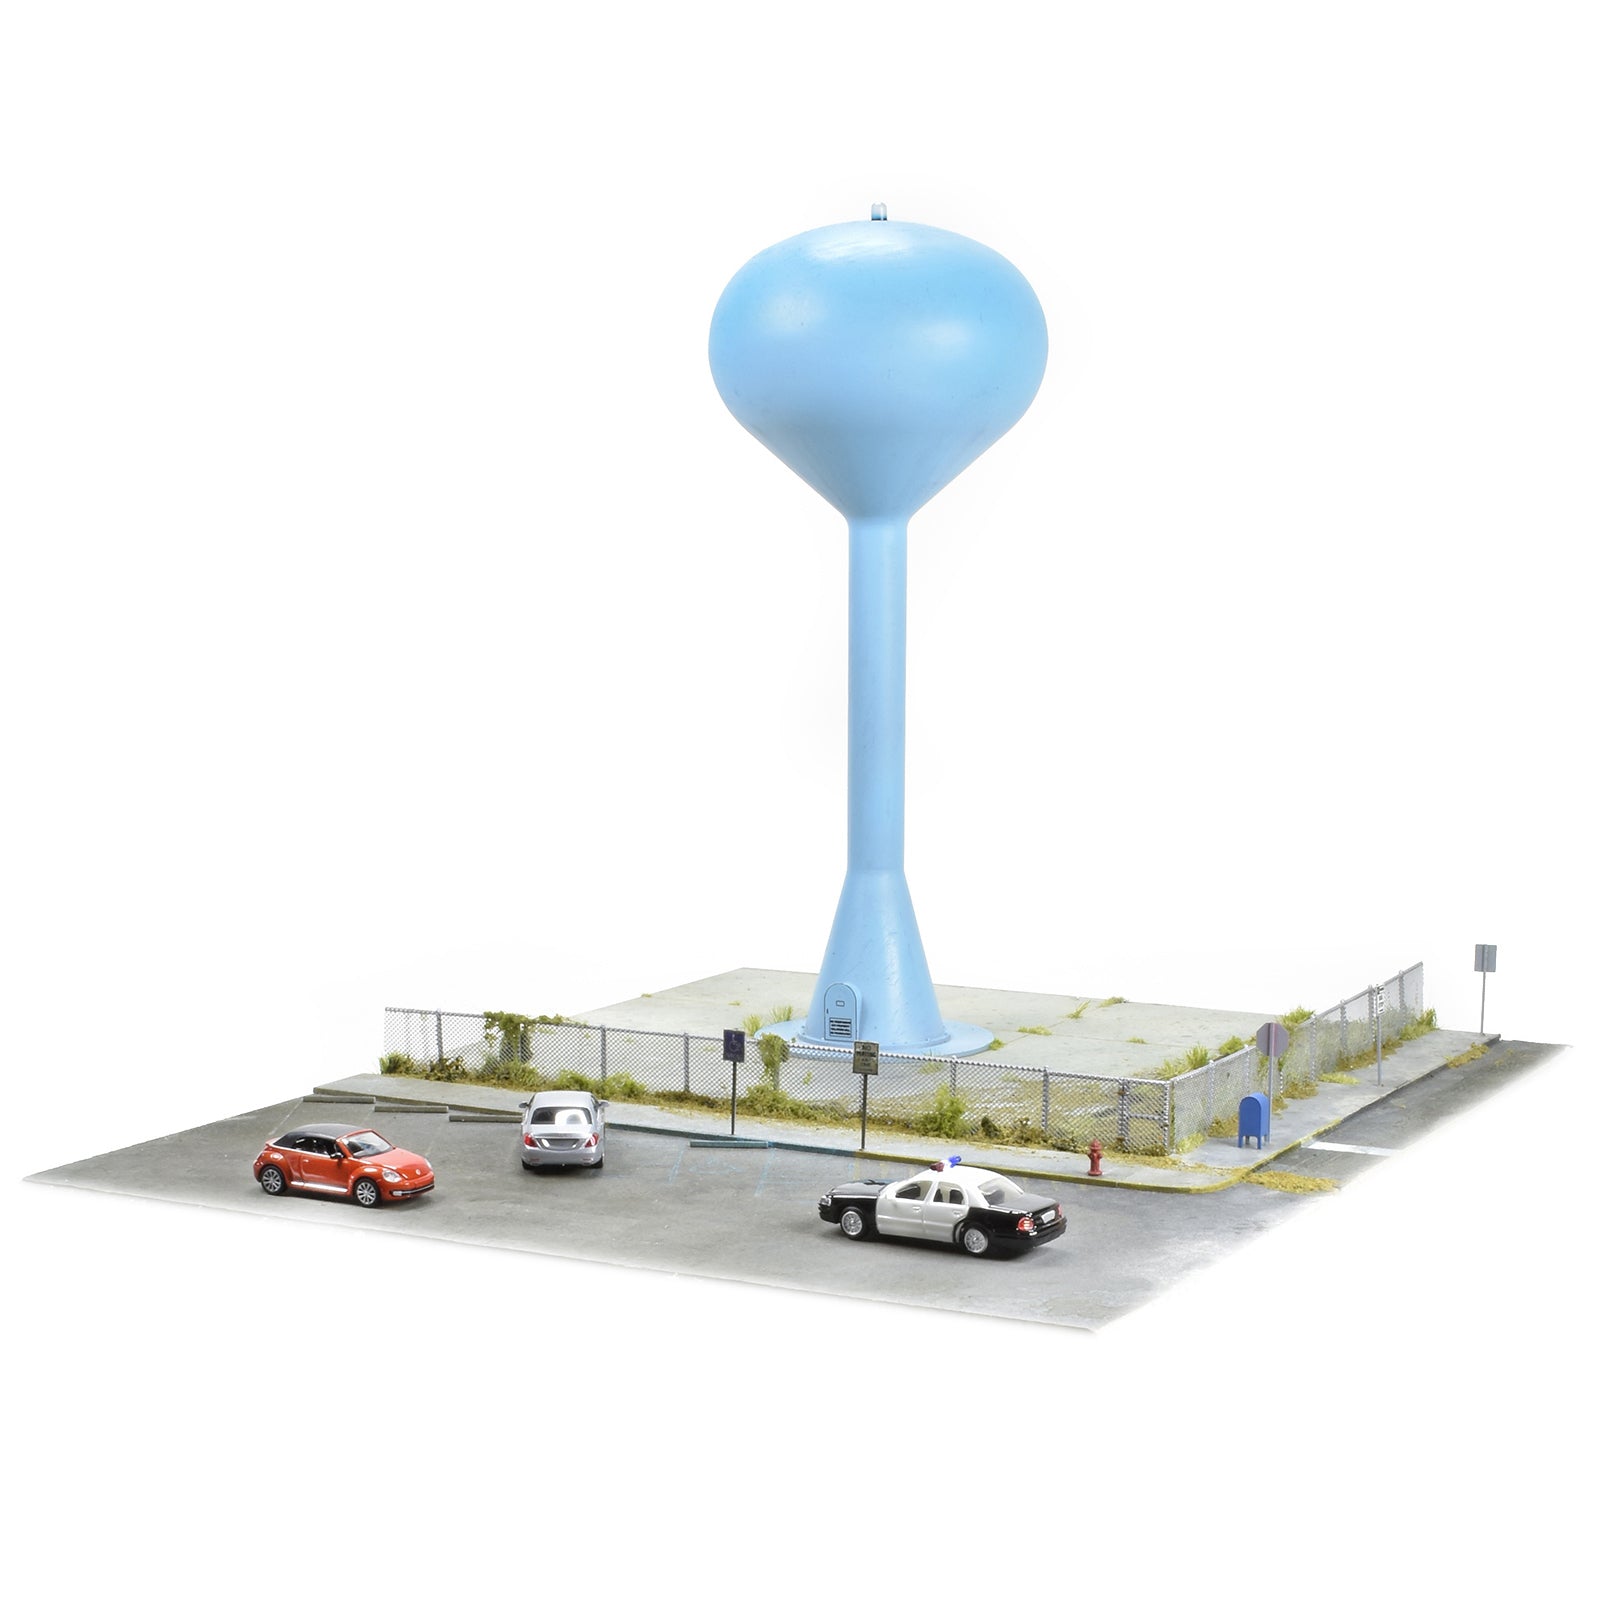 Rail Town Spherical Water Tower w/Flashing Red Light (Smiley Face) Plastic Model Kit, N Scale